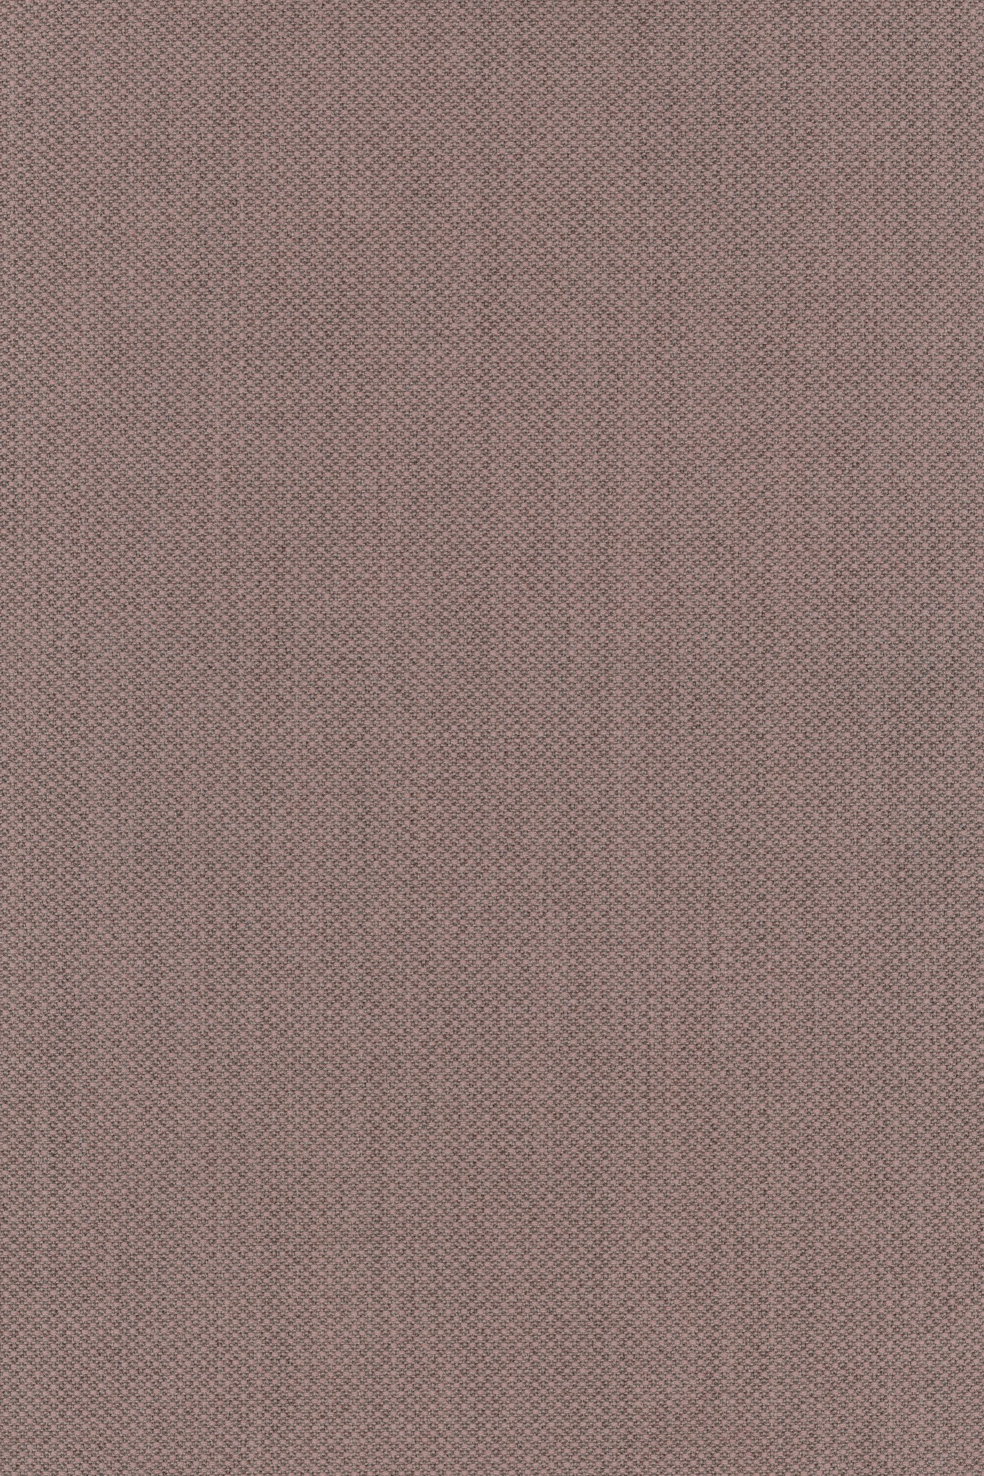 Fabric sample Fiord 551 pink